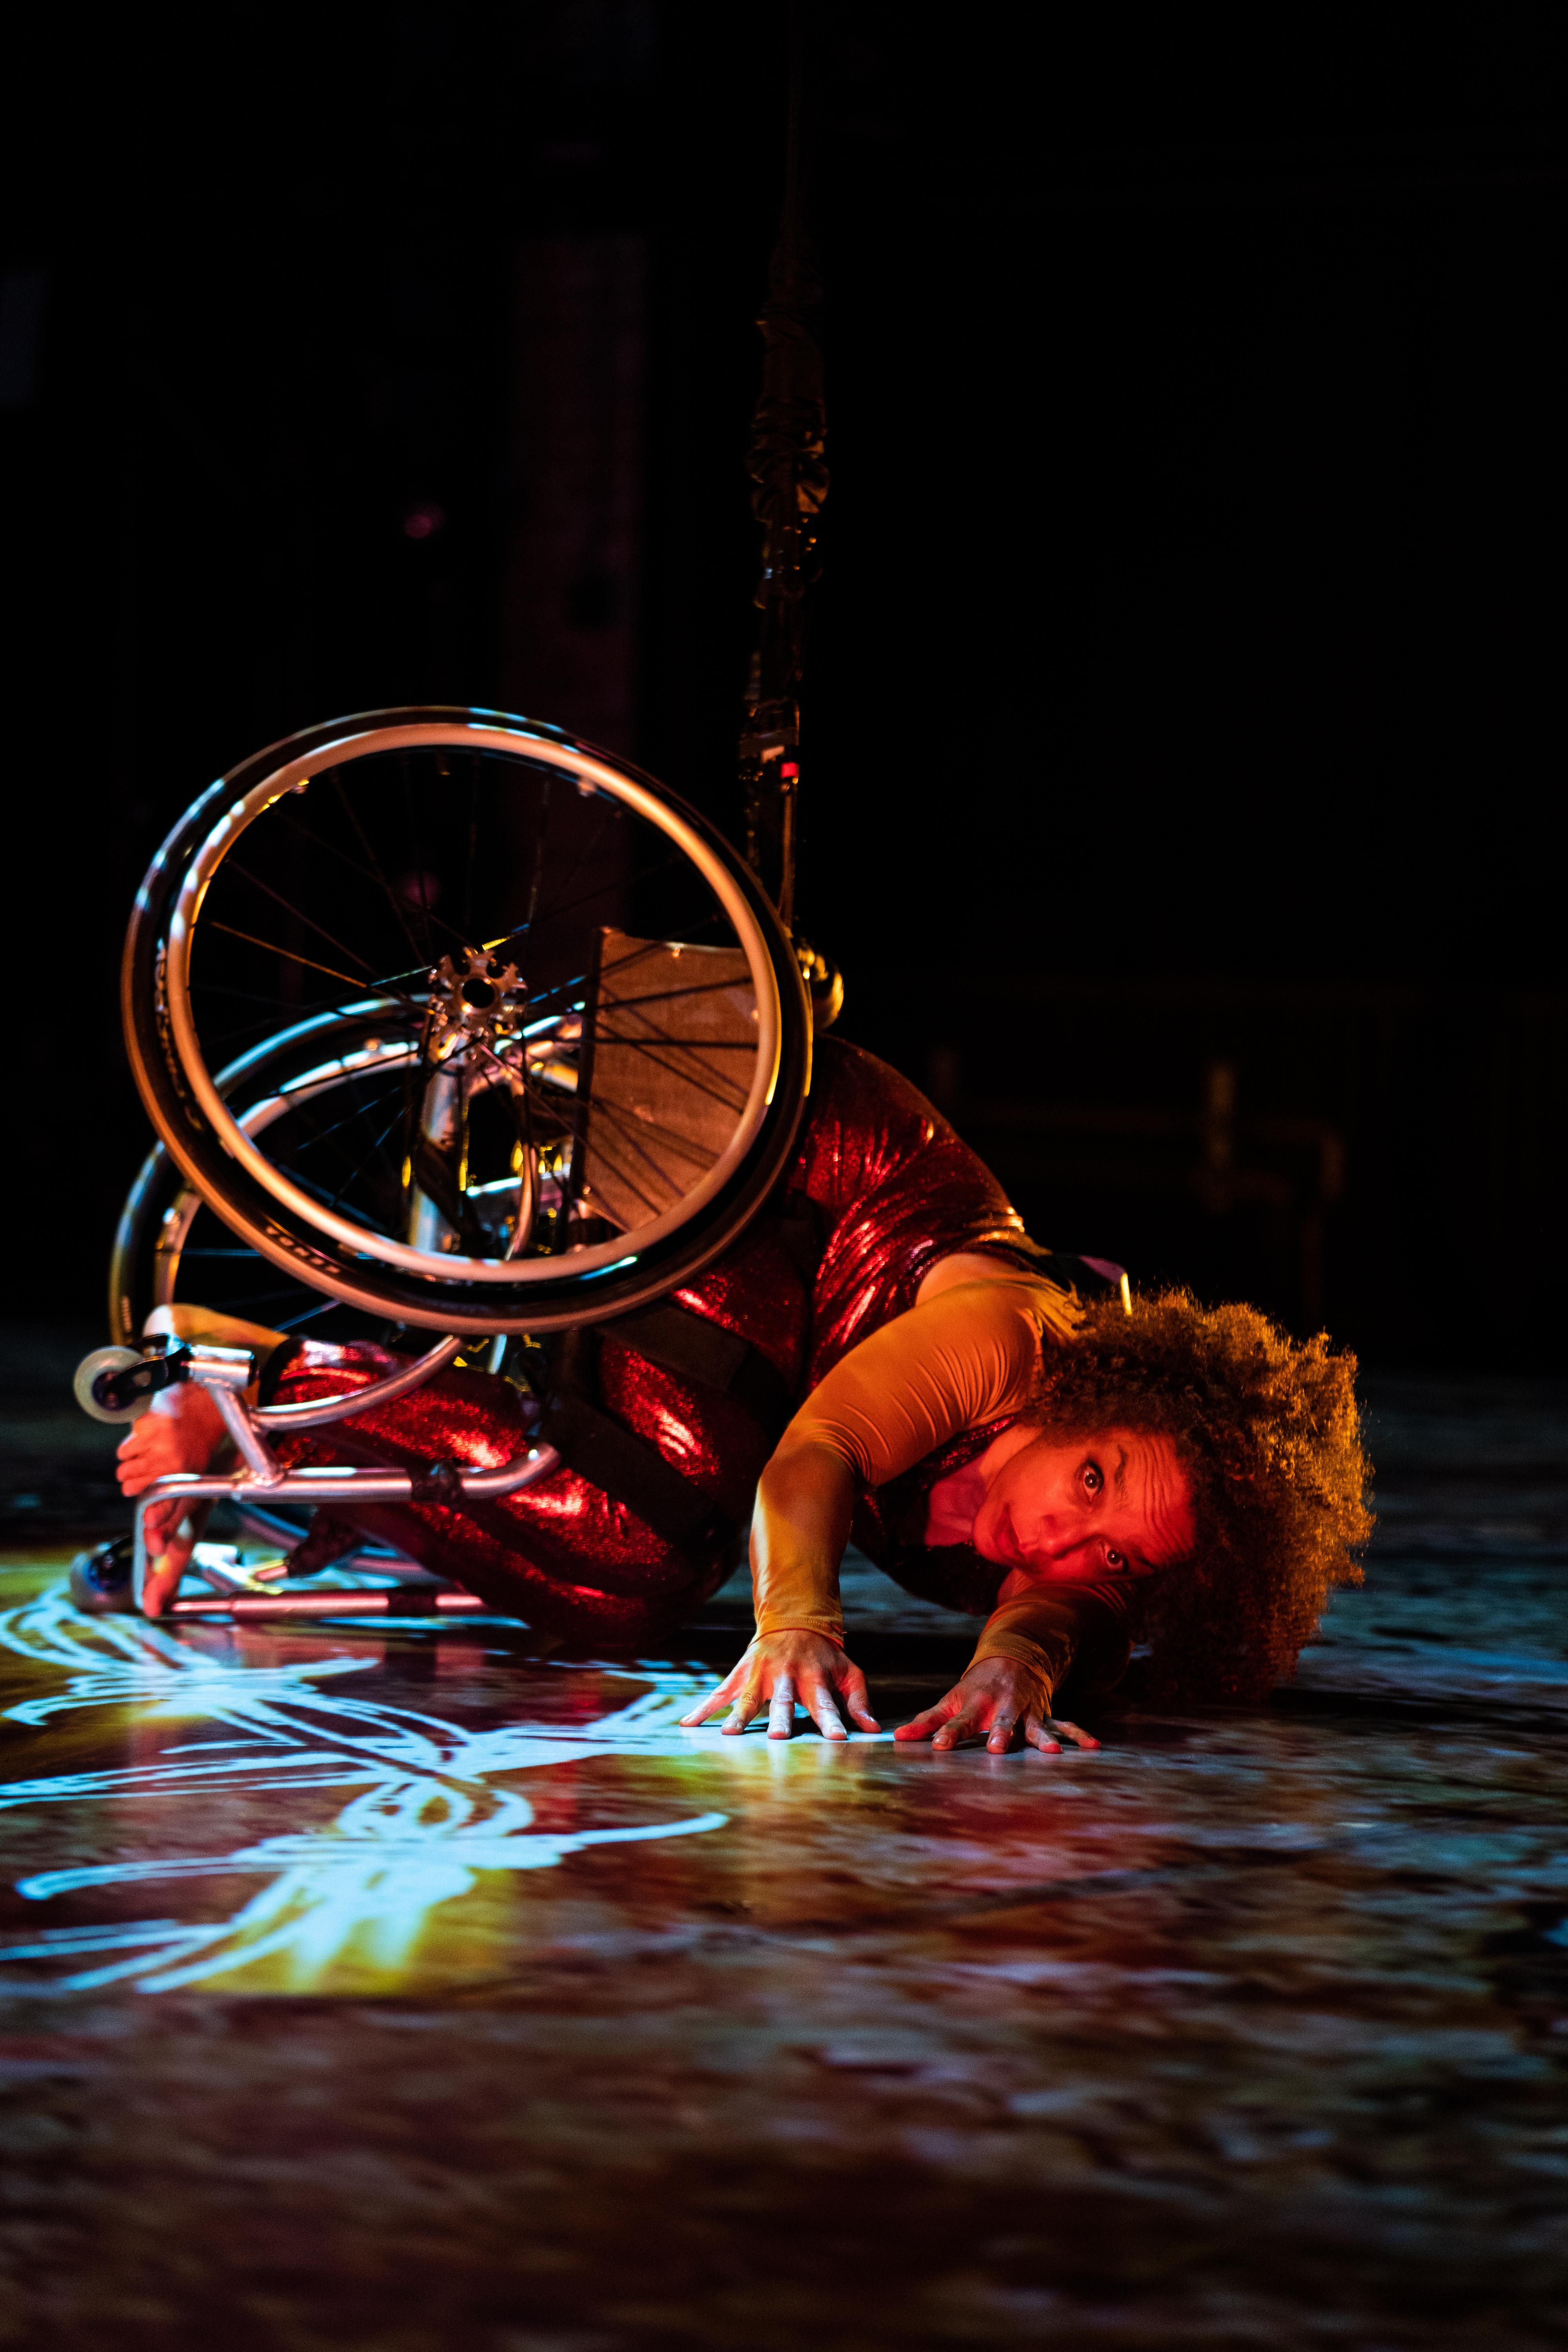 Alice Sheppard, a multiracial Black woman with coffee-colored skin and short curly hair, crouches onstage, legs and wheels curled toward her core, arms reaching toward the camera. \ Dappled purple and blue lighting covers Alice and the floor, as a projection of white and yellow barbed wire extends from under her. She peers intently beyond the camera, eyebrows raised.